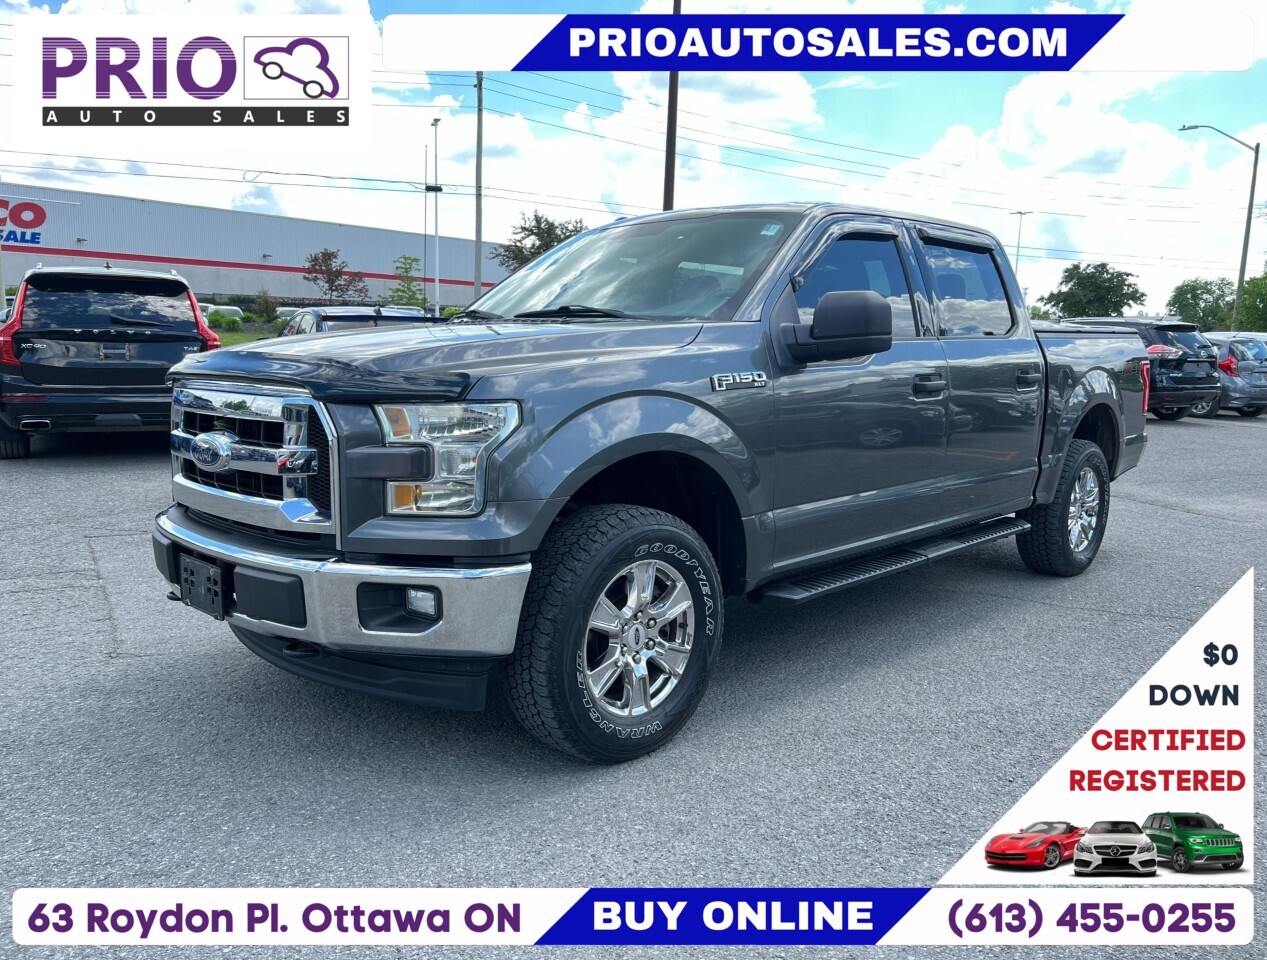 2017 Ford F-150 4WD SuperCrew Styleside 5-1/2 Ft Box XLT